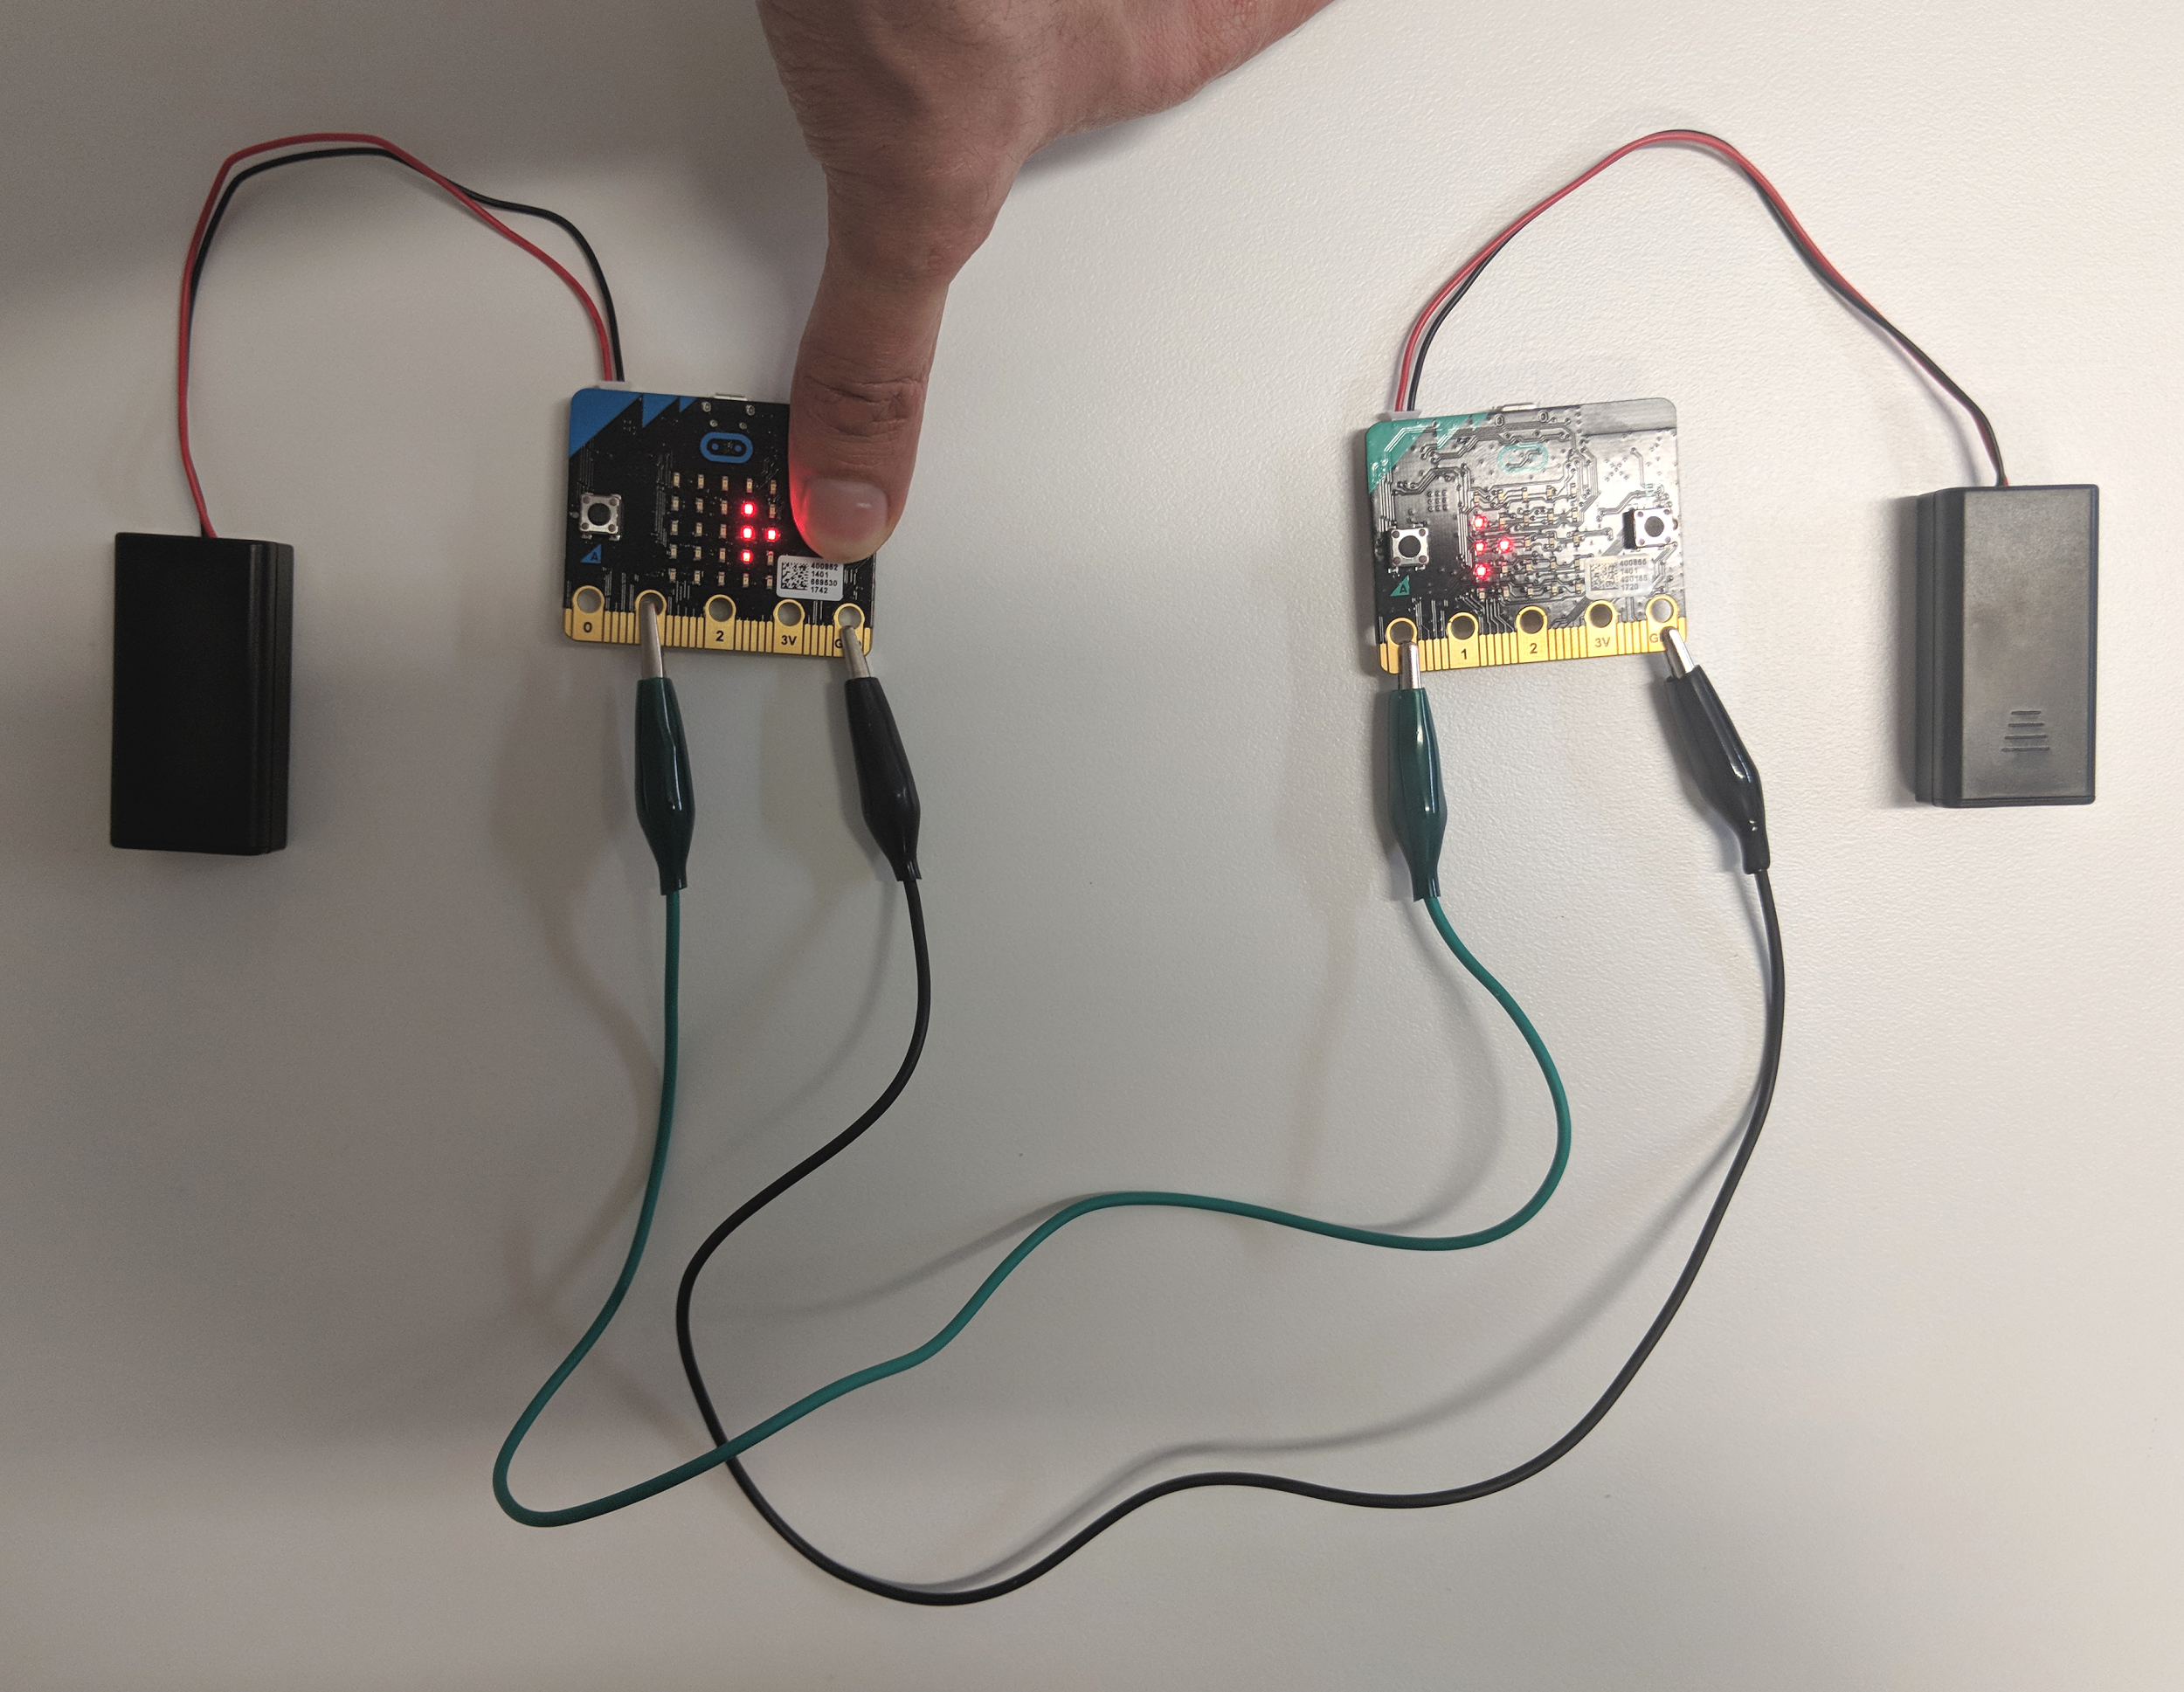 Photograph of two micro:bits connected together.